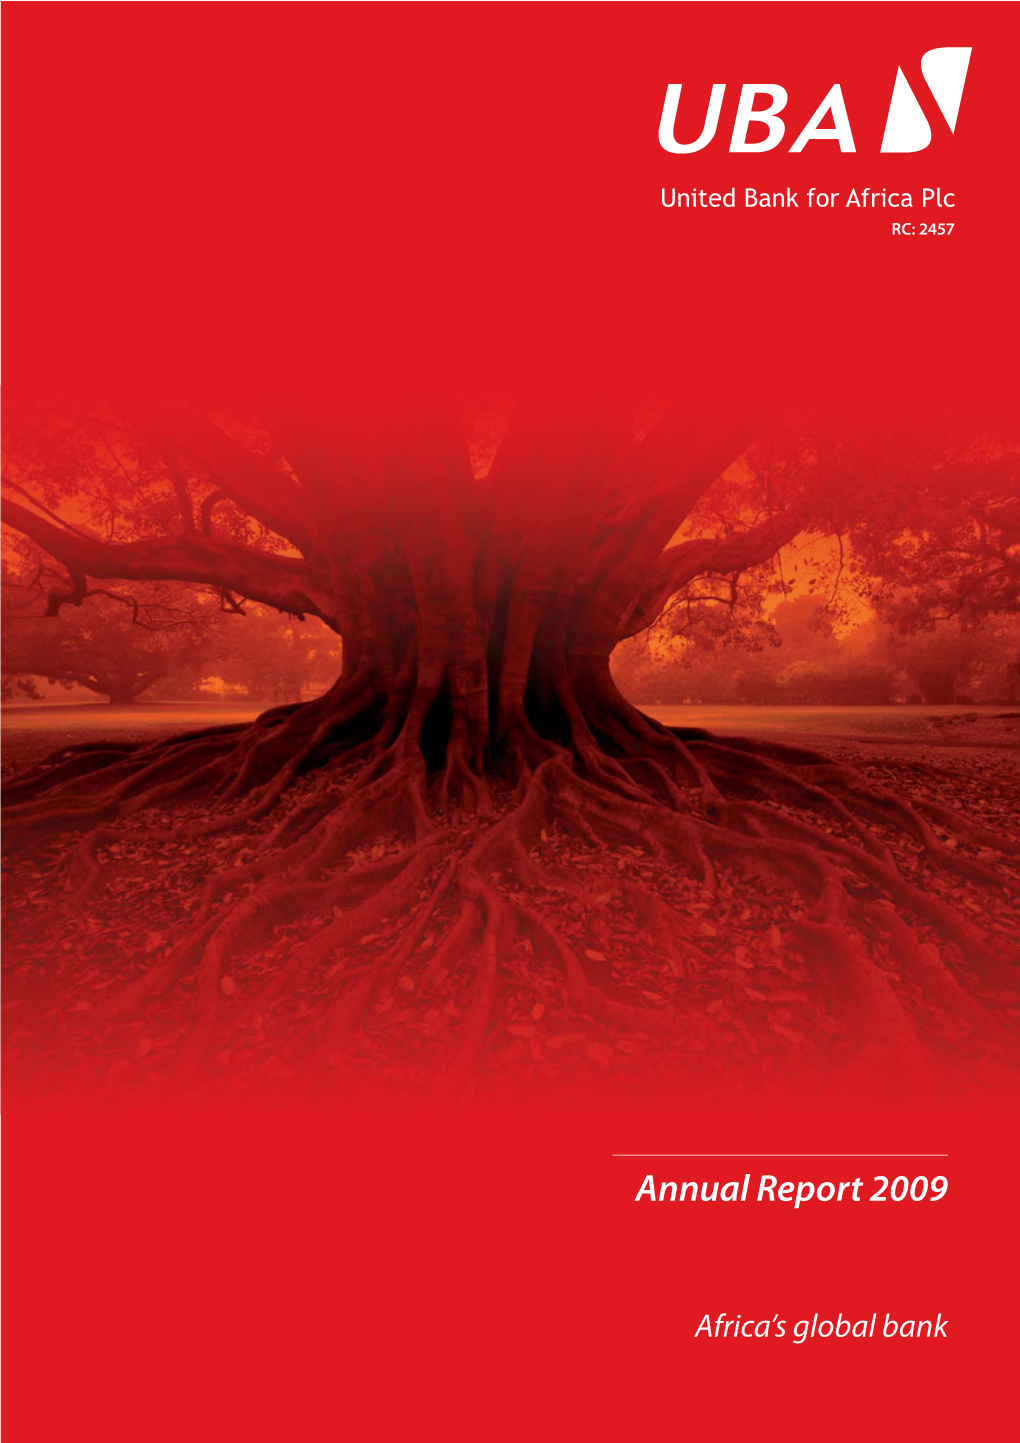 2009 Annual Report and Financial Statements